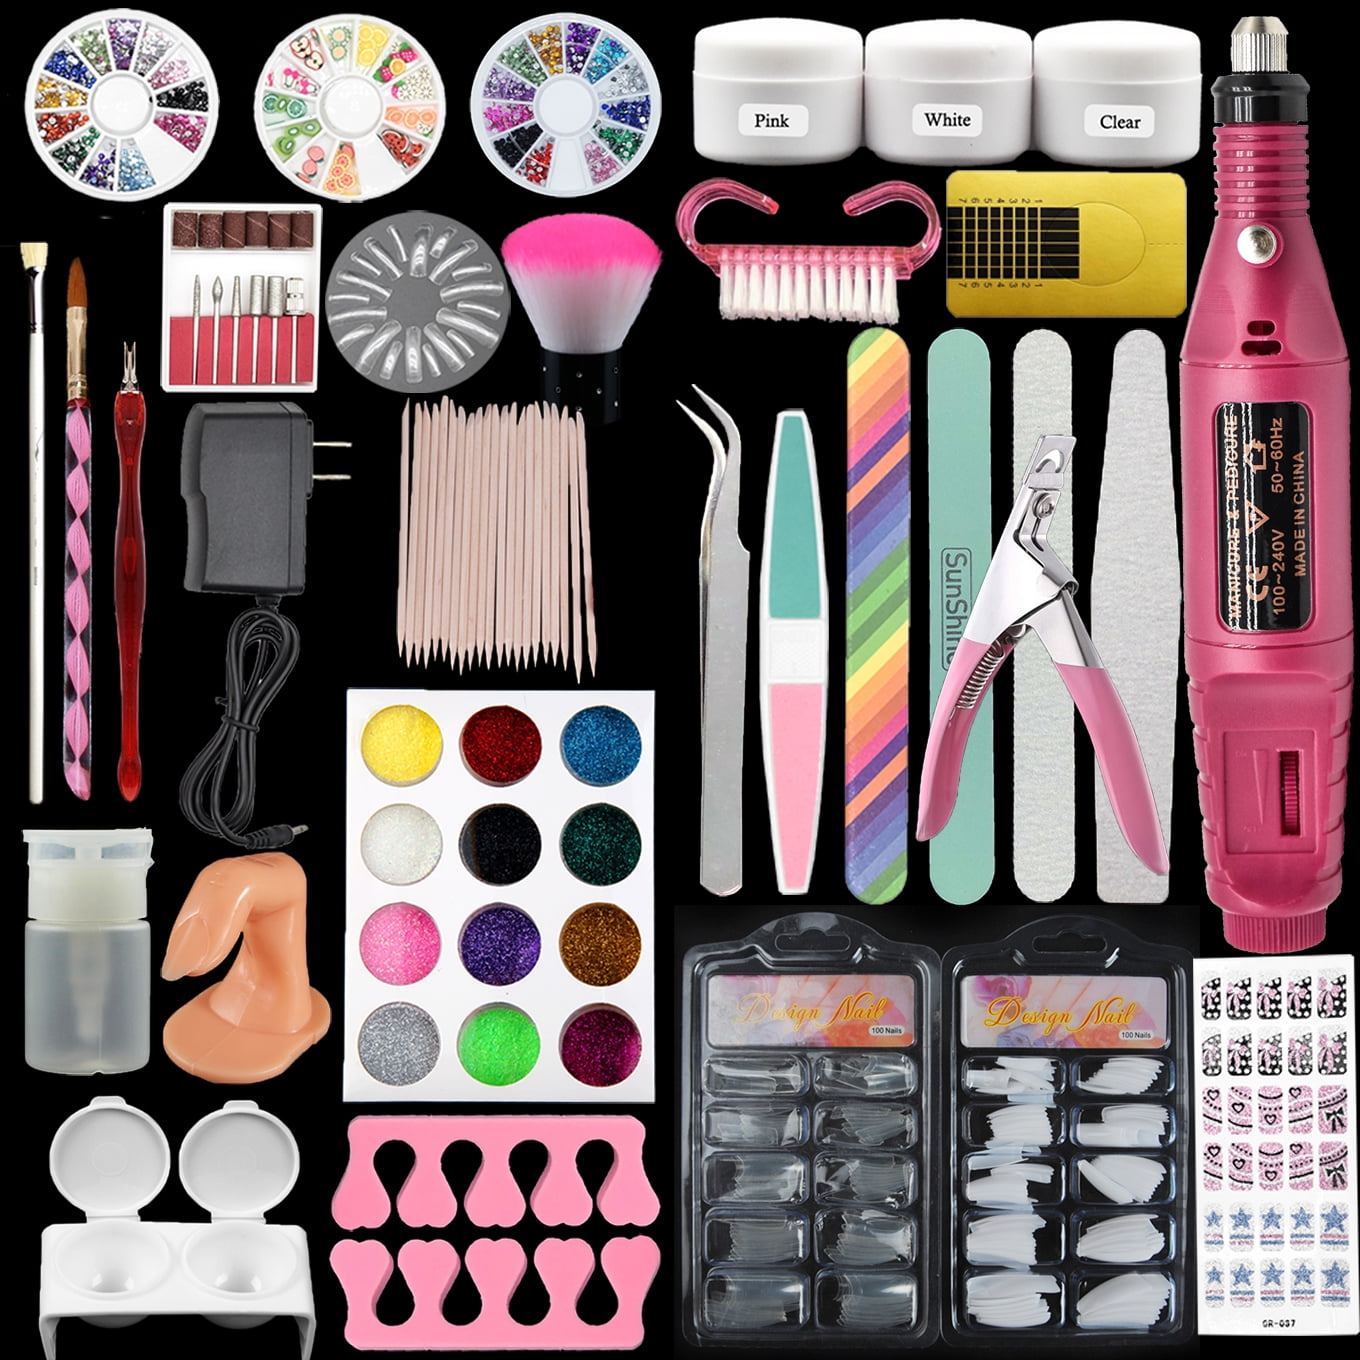 DIY MAKE YOUR OWN NAIL ART TOOLS - PROFESSIONAL QUALITY FULL SET - YouTube